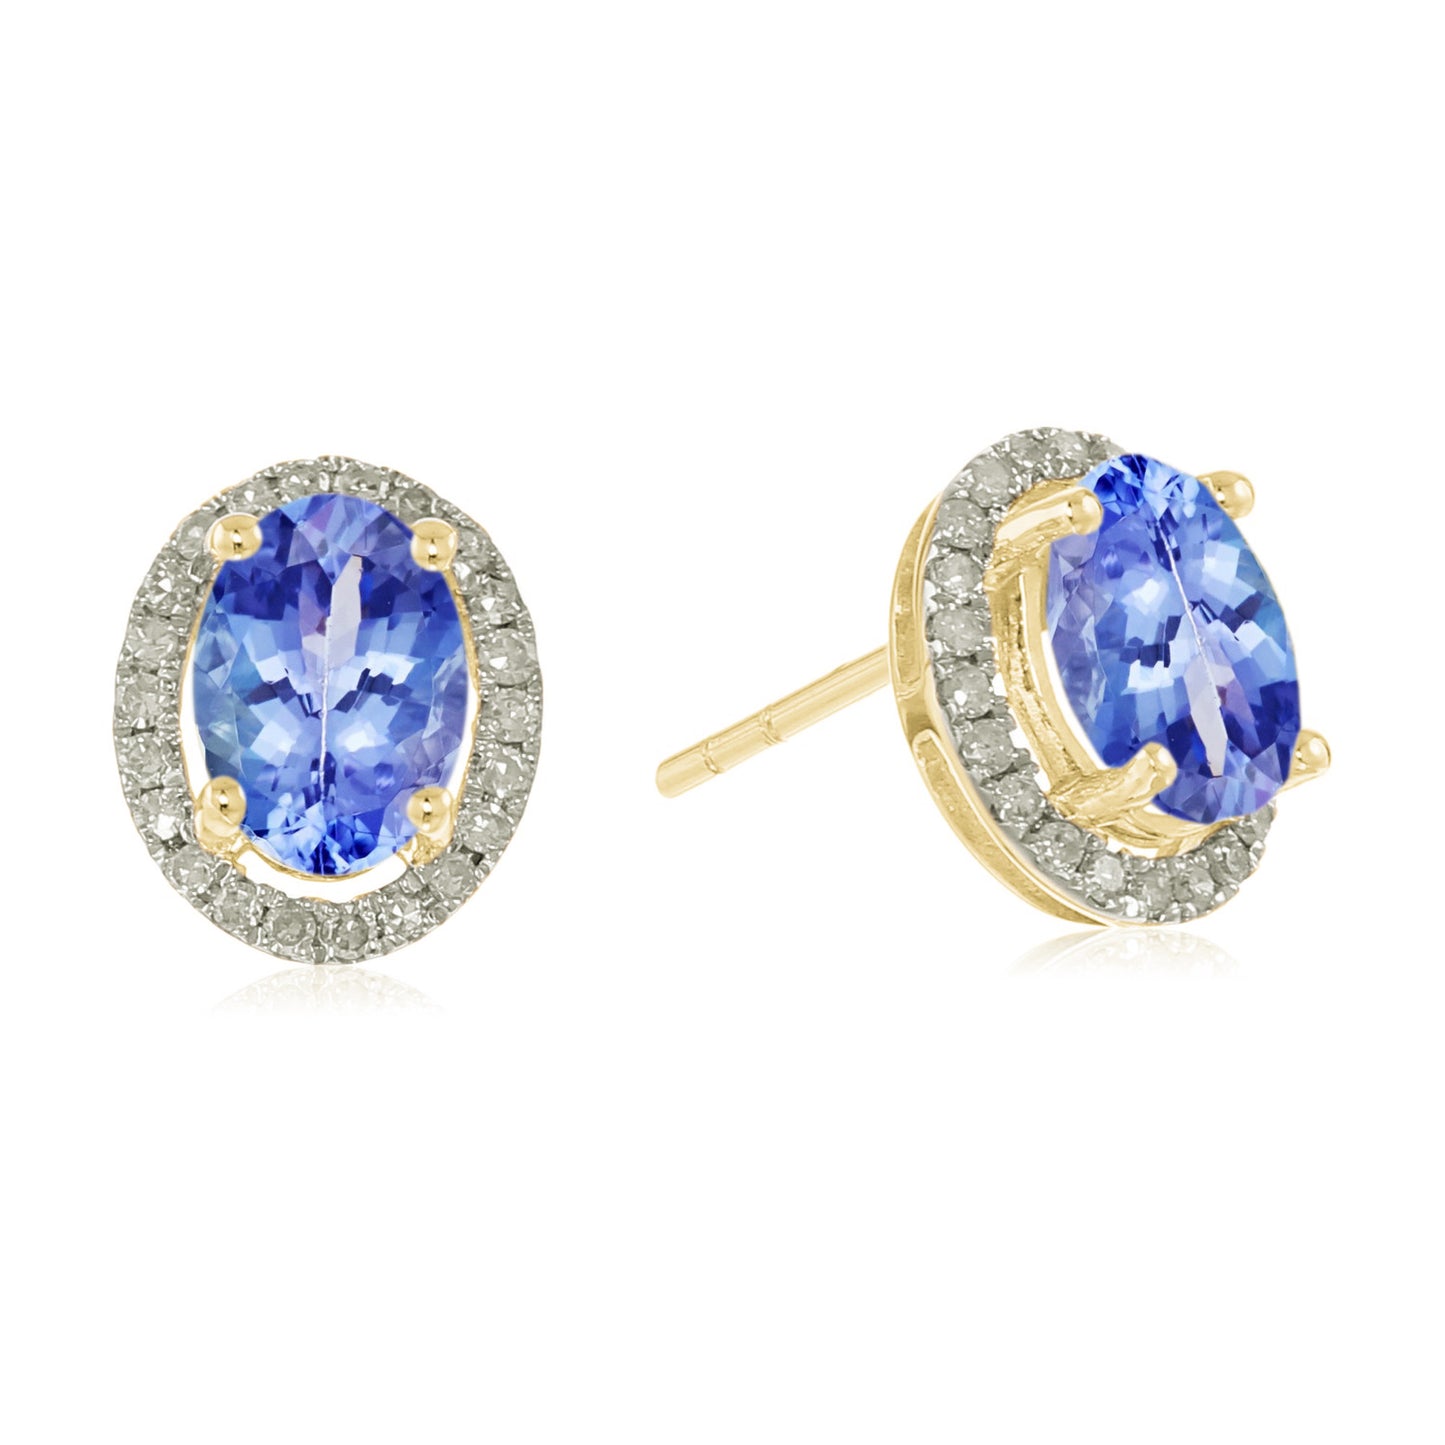 10k Yellow and Rose Gold Genuine Gemstone And Diamond Princess Diana Oval Halo Stud Earring - Pinctore